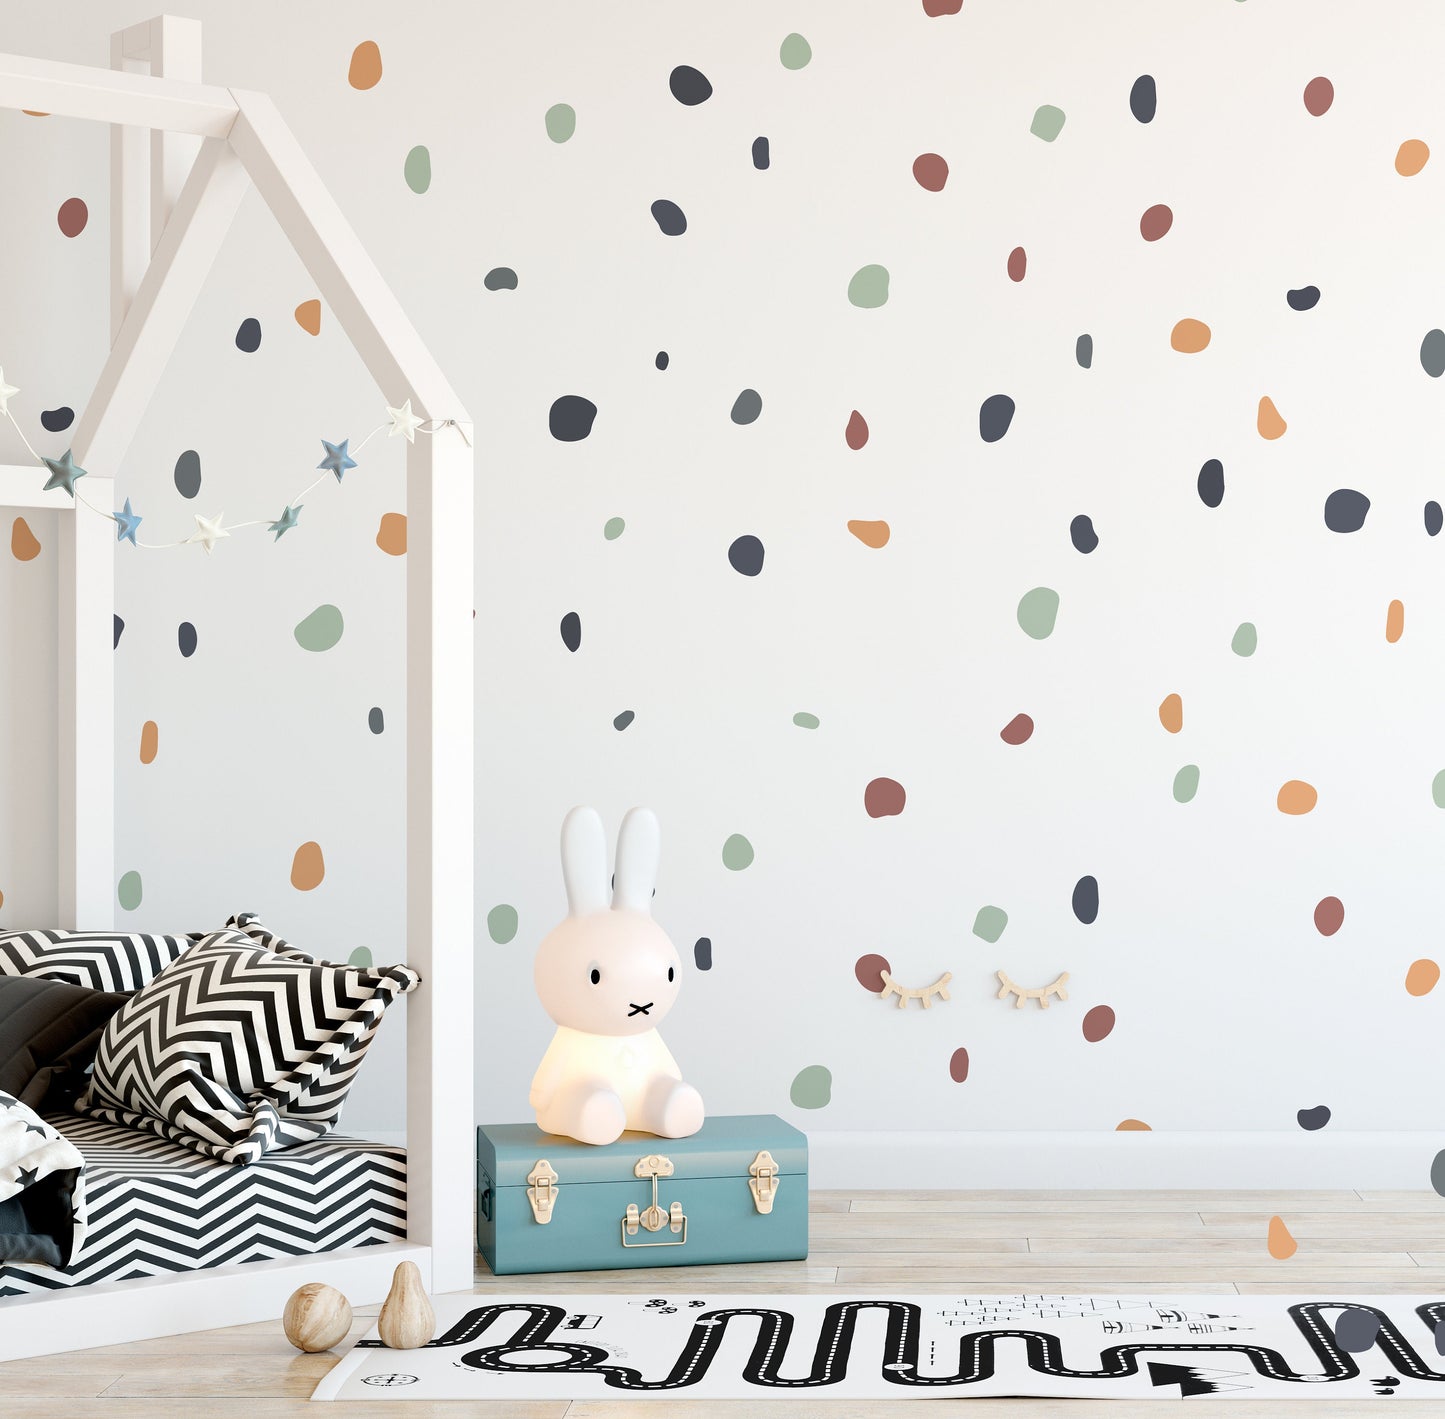 140 Boho Polka Dot Wall Stickers Boho Chic Decals For Kids Nursery Rooms Children's Bedroom Wall Art